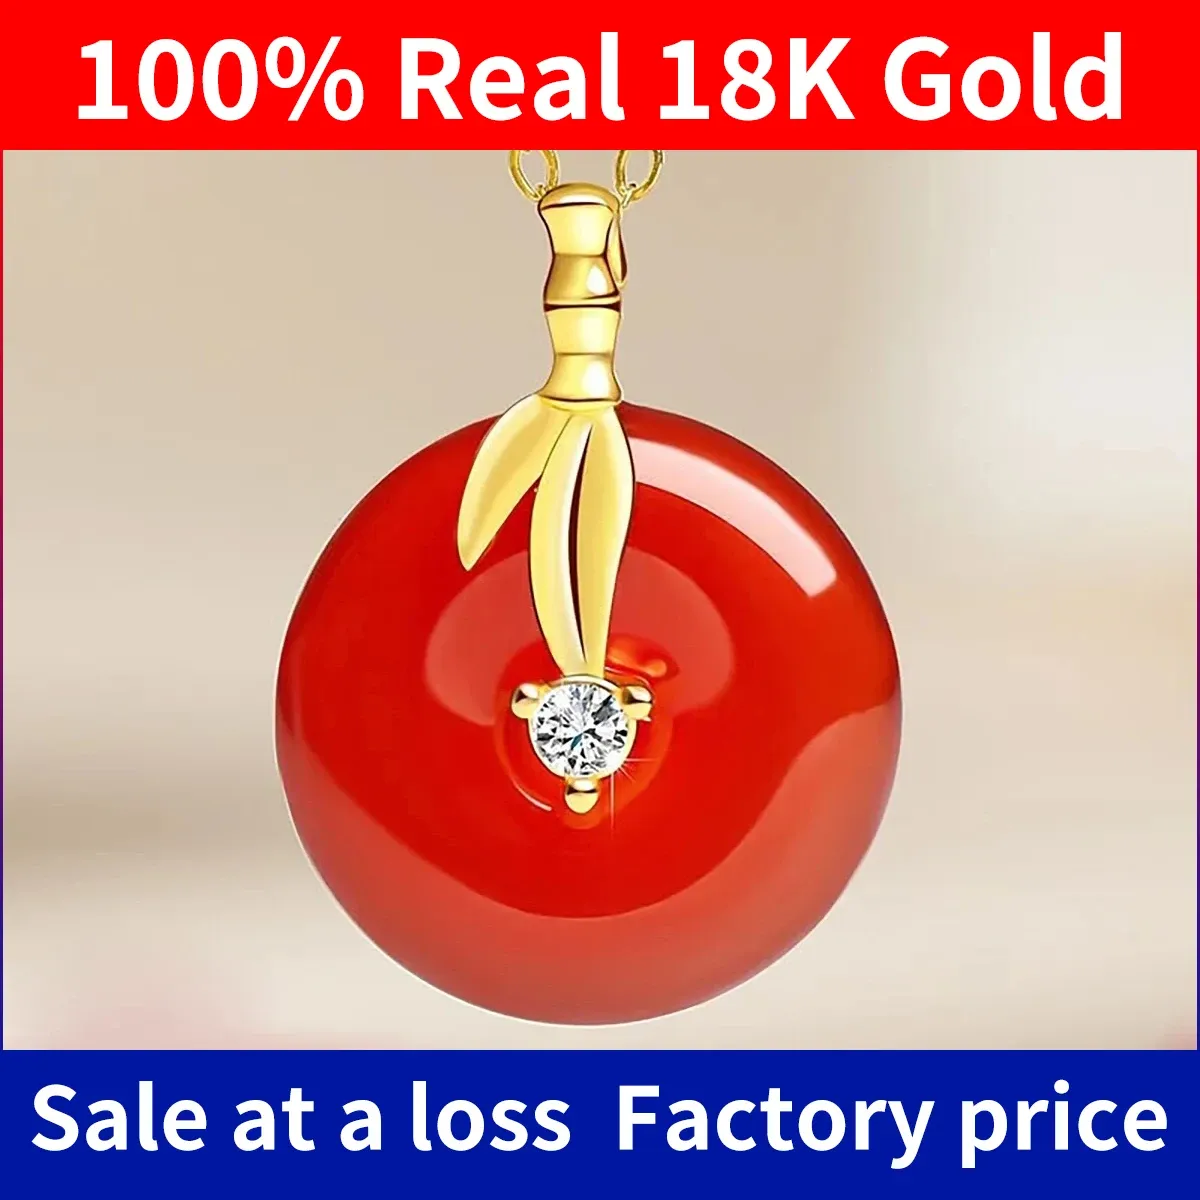 Necklaces Szjinao Bamboo 100% AU750 18K Gold Natrual Red Agate Necklace For Women With Chain Luxury Dubai Jewelry Get Well Soon Gift Sale